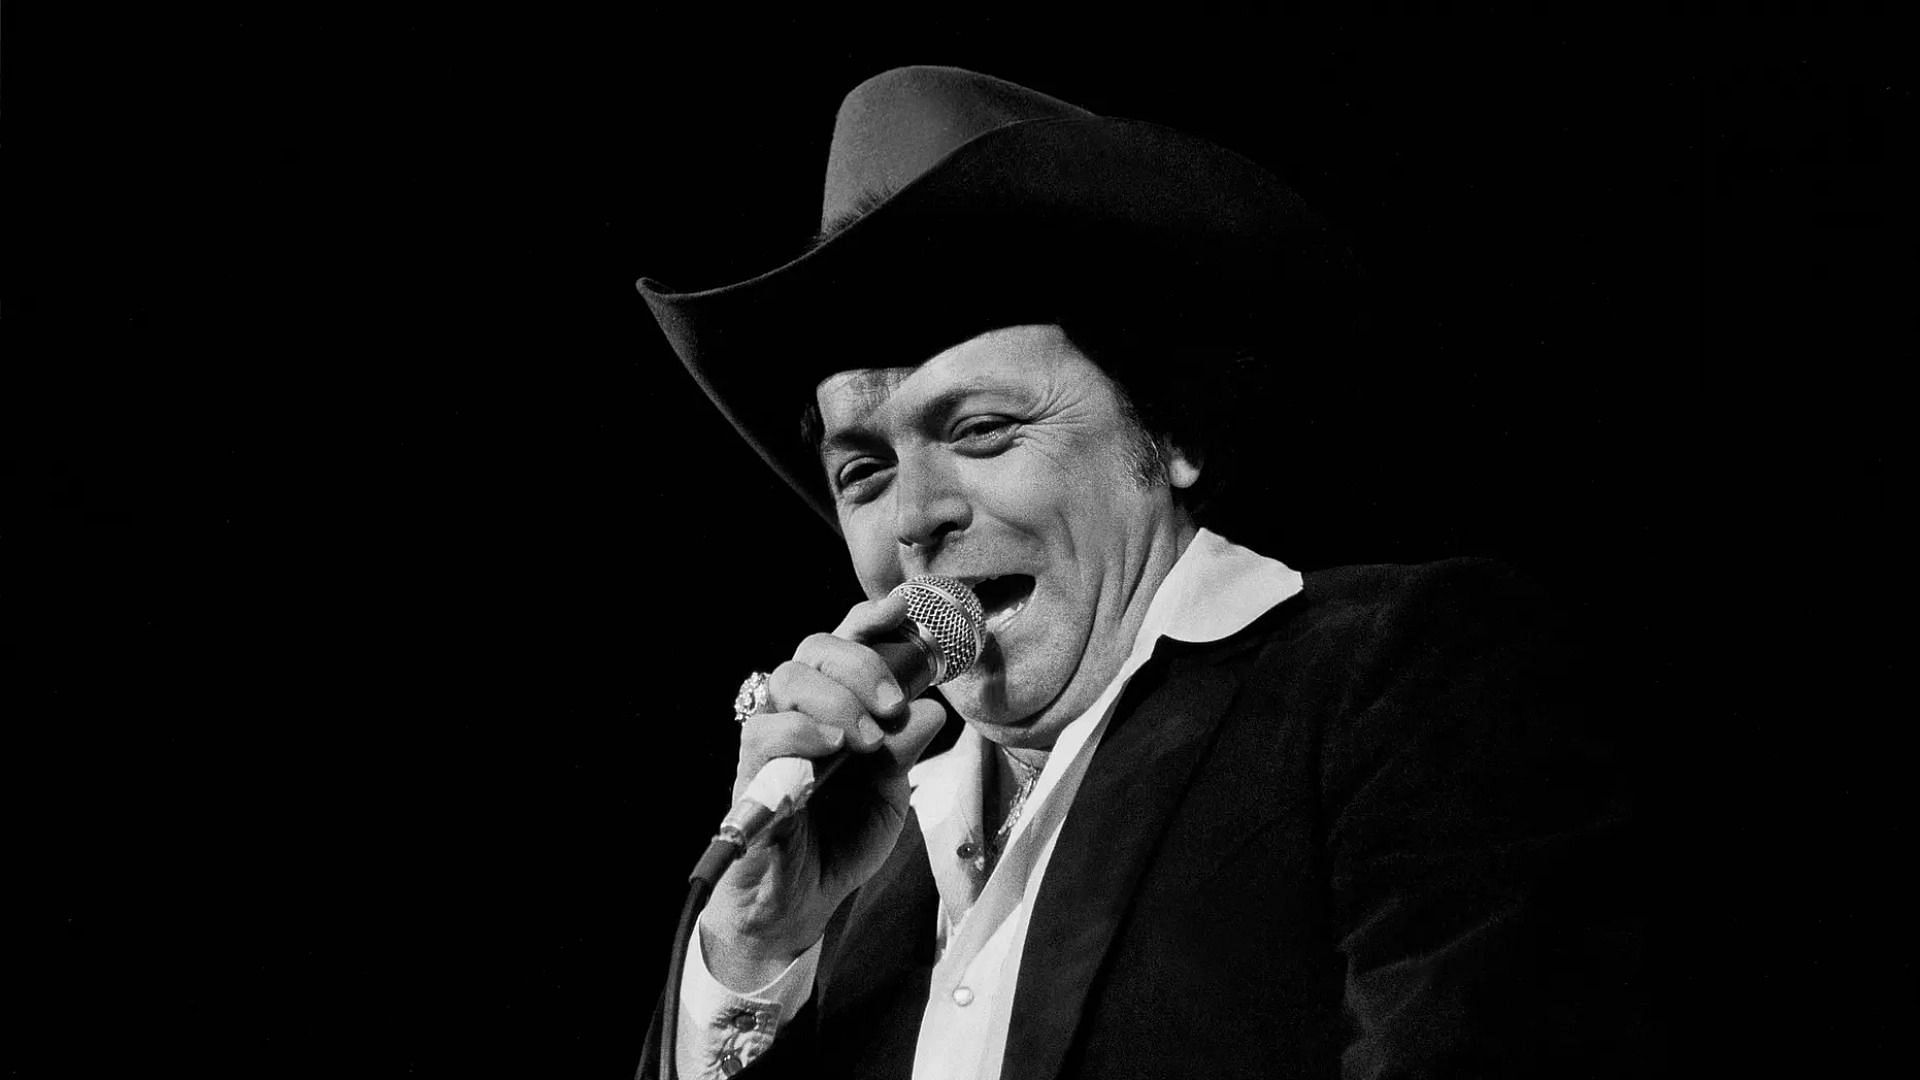 Mickey Gilley was one of the first famous country artists to open his theater in Branson, Missouri, in 1989. (Image via Getty Images/Paul Natkin)